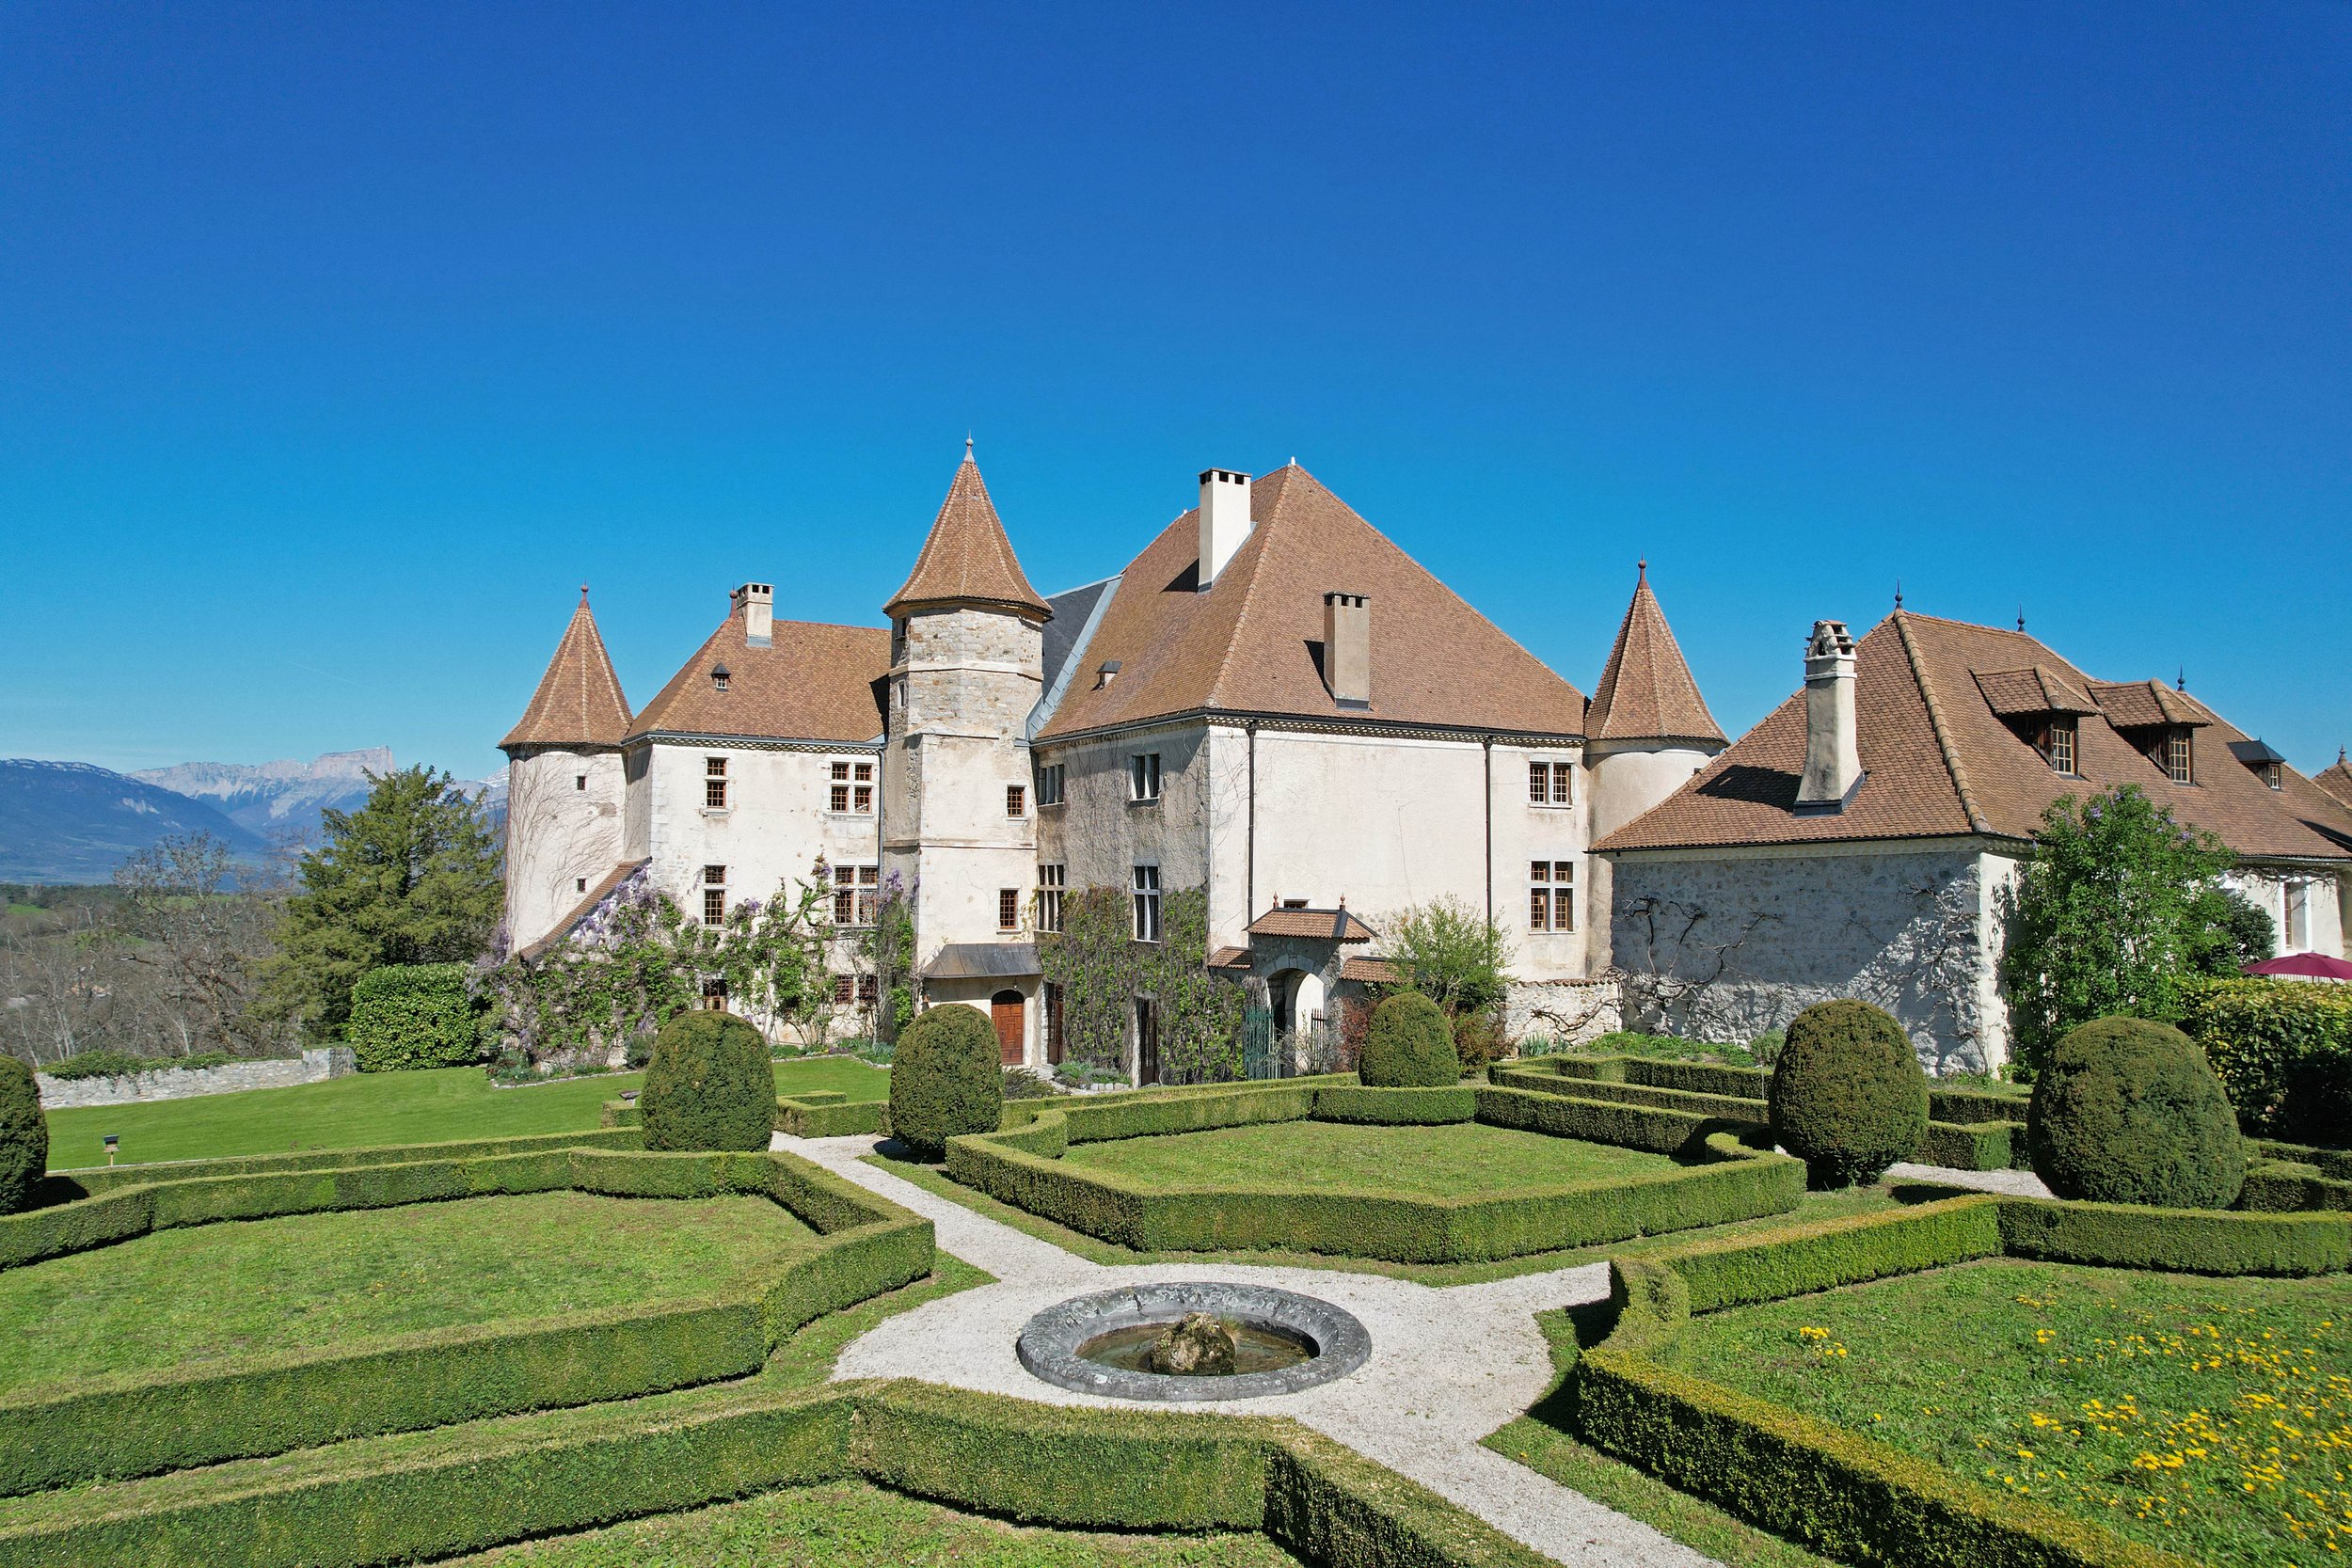 Francis York Emile Garcin Restored French Chateau and Country Estate in Vercors, France 5.jpg